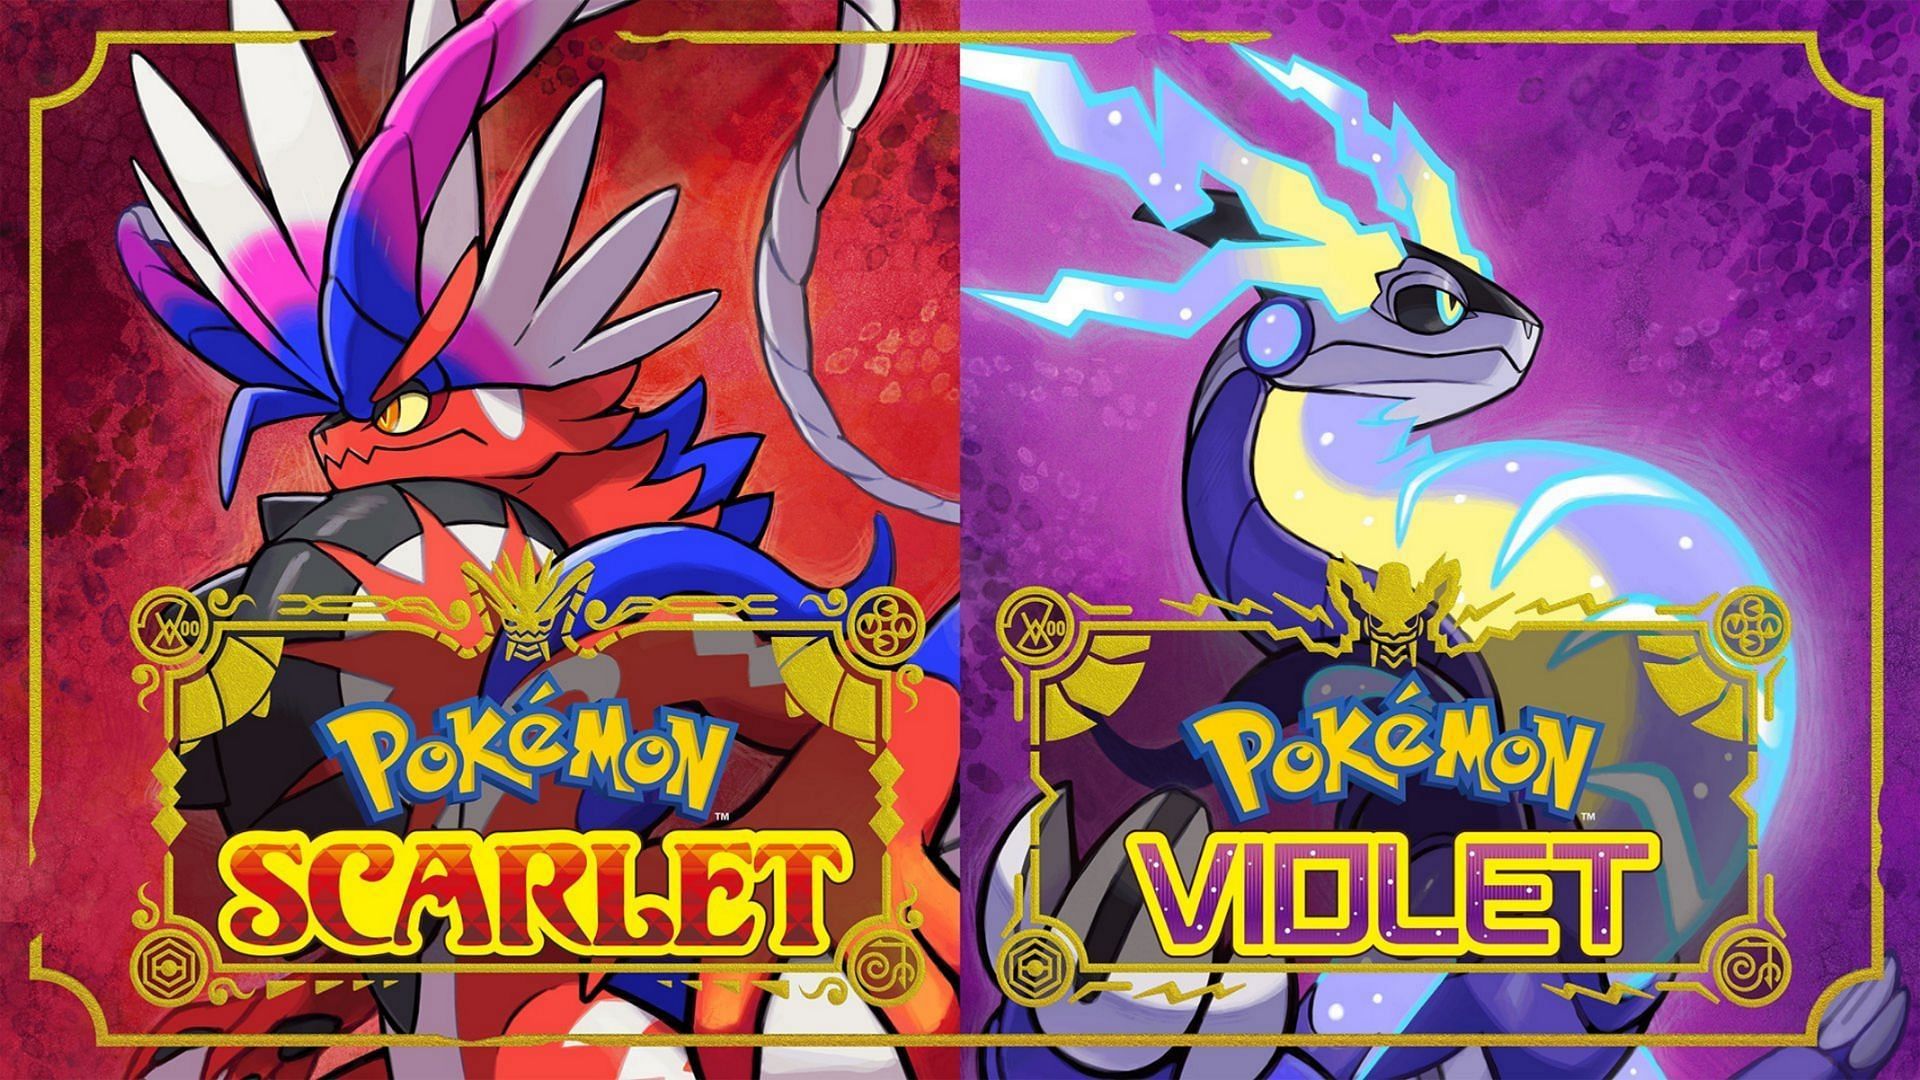 The patch notes for version 1.2 have been revealed (Image via Pokemon Scarlet and Violet)